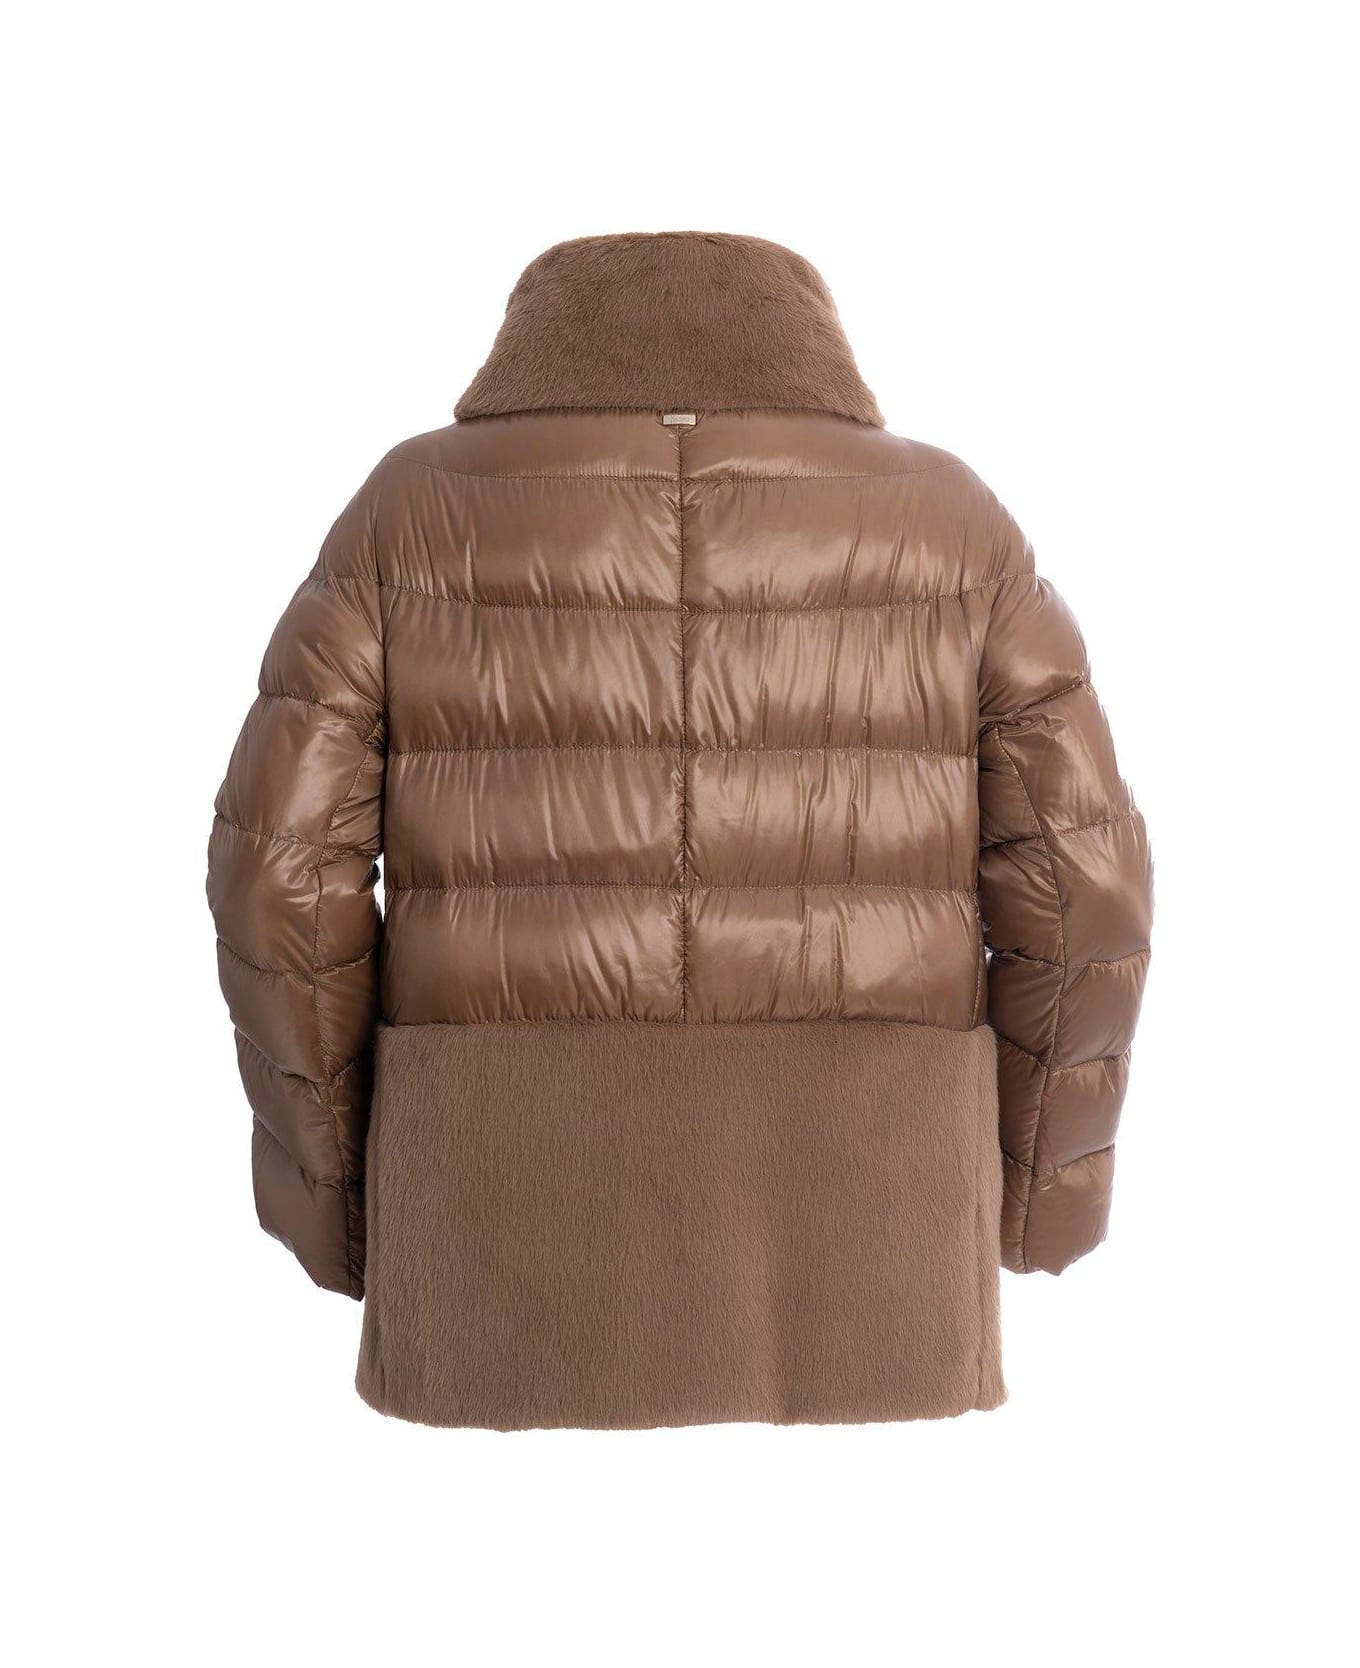 Herno Panelled Zipped Down Jacket - Cammello コート